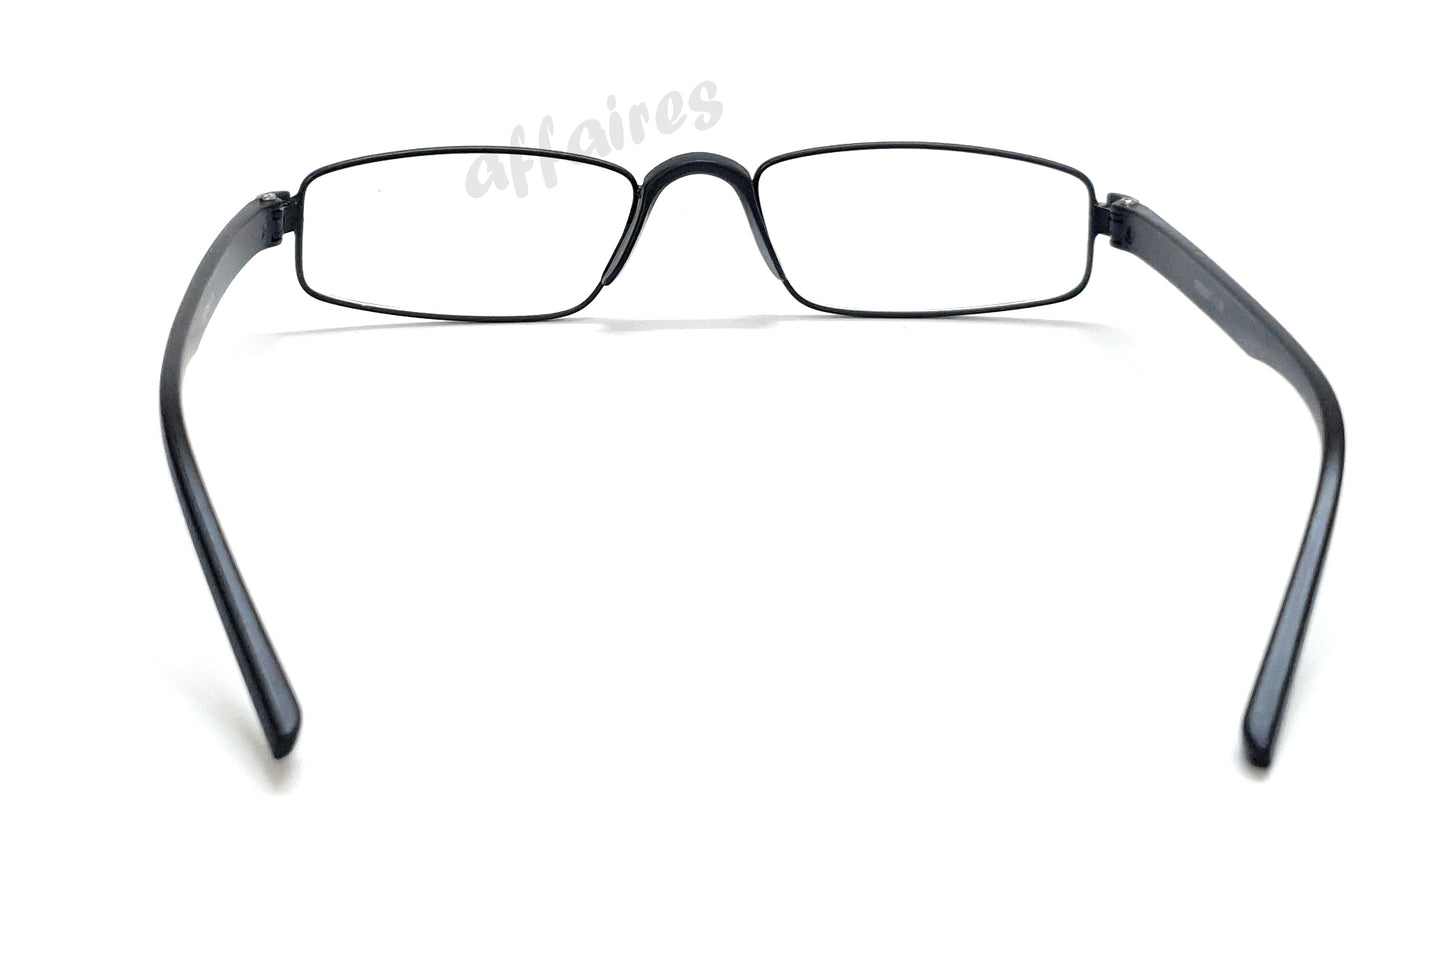 Affaires Reading Glass Fix Nose Pad Unisex Rectangle Full Rim Power Reading Spectacle Glasses for Near Vision Color Black